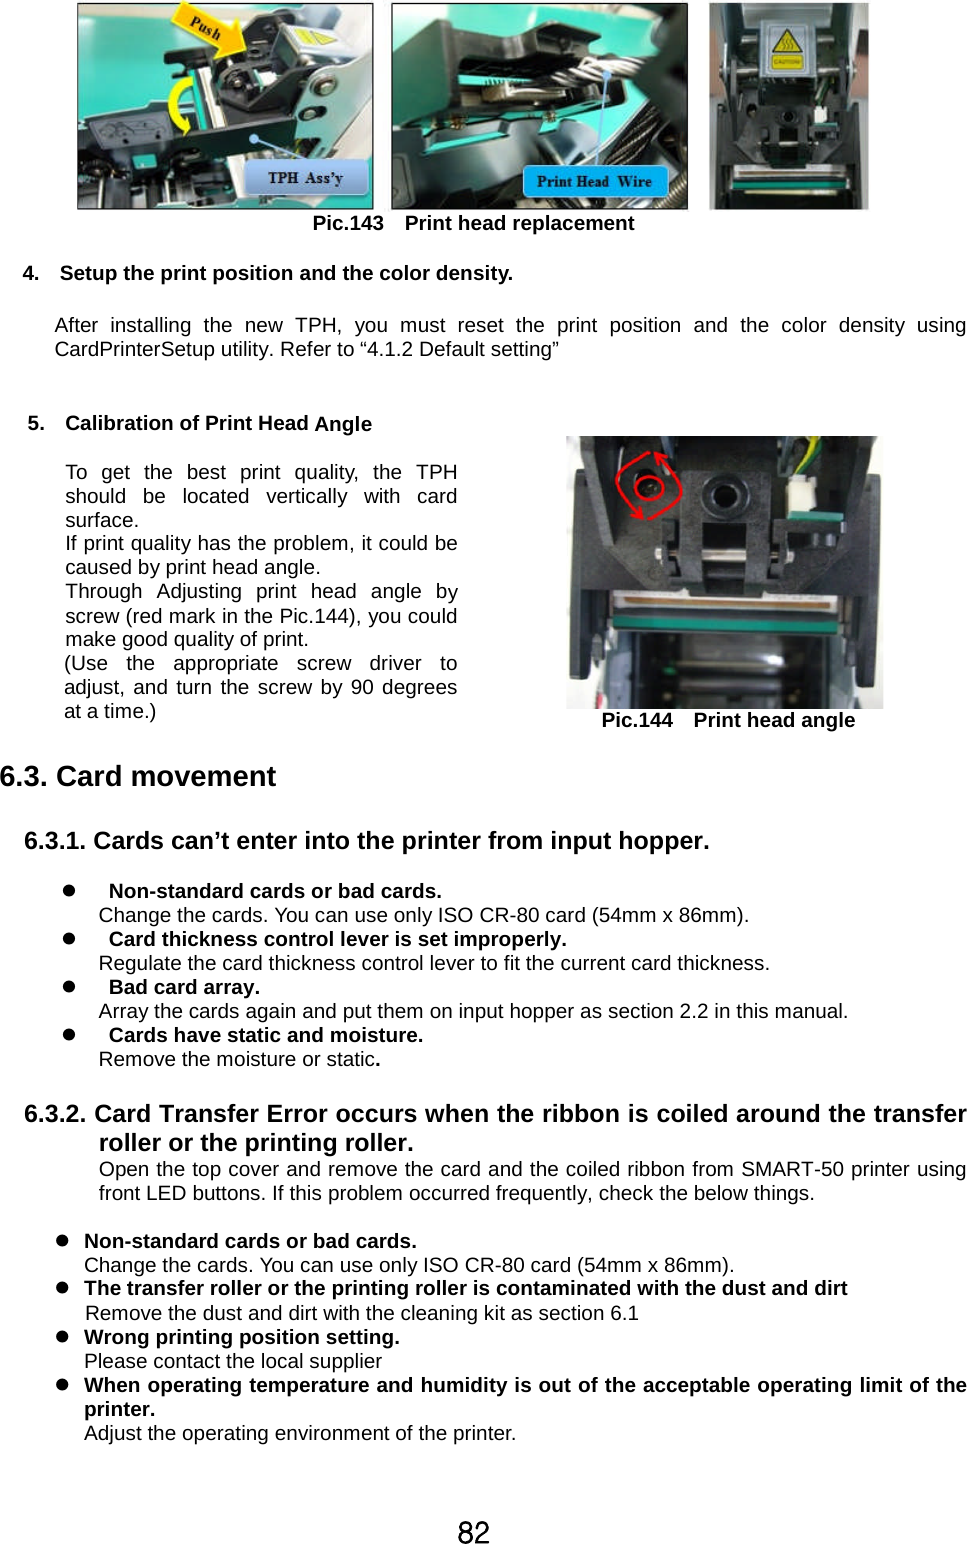 _YPic.143 Print head replacement4. Setup the print position and the color density.After installing the new TPH, you must reset the print position and the color density usingCardPrinterSetup utility. Refer to “4.1.2 Default setting”5. Calibration of Print HeadAngleTo get the best print quality, the TPHshould be located vertically with cardsurface.If print quality has the problem, it could becaused by print head angle.Through Adjusting print head angle byscrew (red mark in the Pic.144), you couldmake good quality of print.(Use the appropriate screw driver toadjust, and turn the screw by 90 degreesat a time.) Pic.144 Print head angle6.3. Card movement6.3.1. Cards can’t enter into the printer from input hopper.zNon-standard cards or bad cards.Change the cards. You can use only ISO CR-80 card (54mm x 86mm).zCard thickness control lever is set improperly.Regulate the card thickness control lever to fit the current card thickness.zBadcardarray.Array the cards again and put them on input hopper as section 2.2 in this manual.zCards have static and moisture.Remove the moisture or static.6.3.2. Card Transfer Error occurs when the ribbon is coiled around the transferroller or the printing roller.Open the top cover and remove the card and the coiled ribbon from SMART-50 printer usingfront LED buttons. If this problem occurred frequently, check the below things.zNon-standard cards or bad cards.Change the cards. You can use only ISO CR-80 card (54mm x 86mm).zThe transfer roller or the printing roller is contaminated with the dust and dirtRemove the dust and dirt with the cleaning kit as section 6.1zWrong printing position setting.Please contact the local supplierzWhen operating temperature and humidity is out of the acceptable operating limit of theprinter.Adjust the operating environment of the printer.